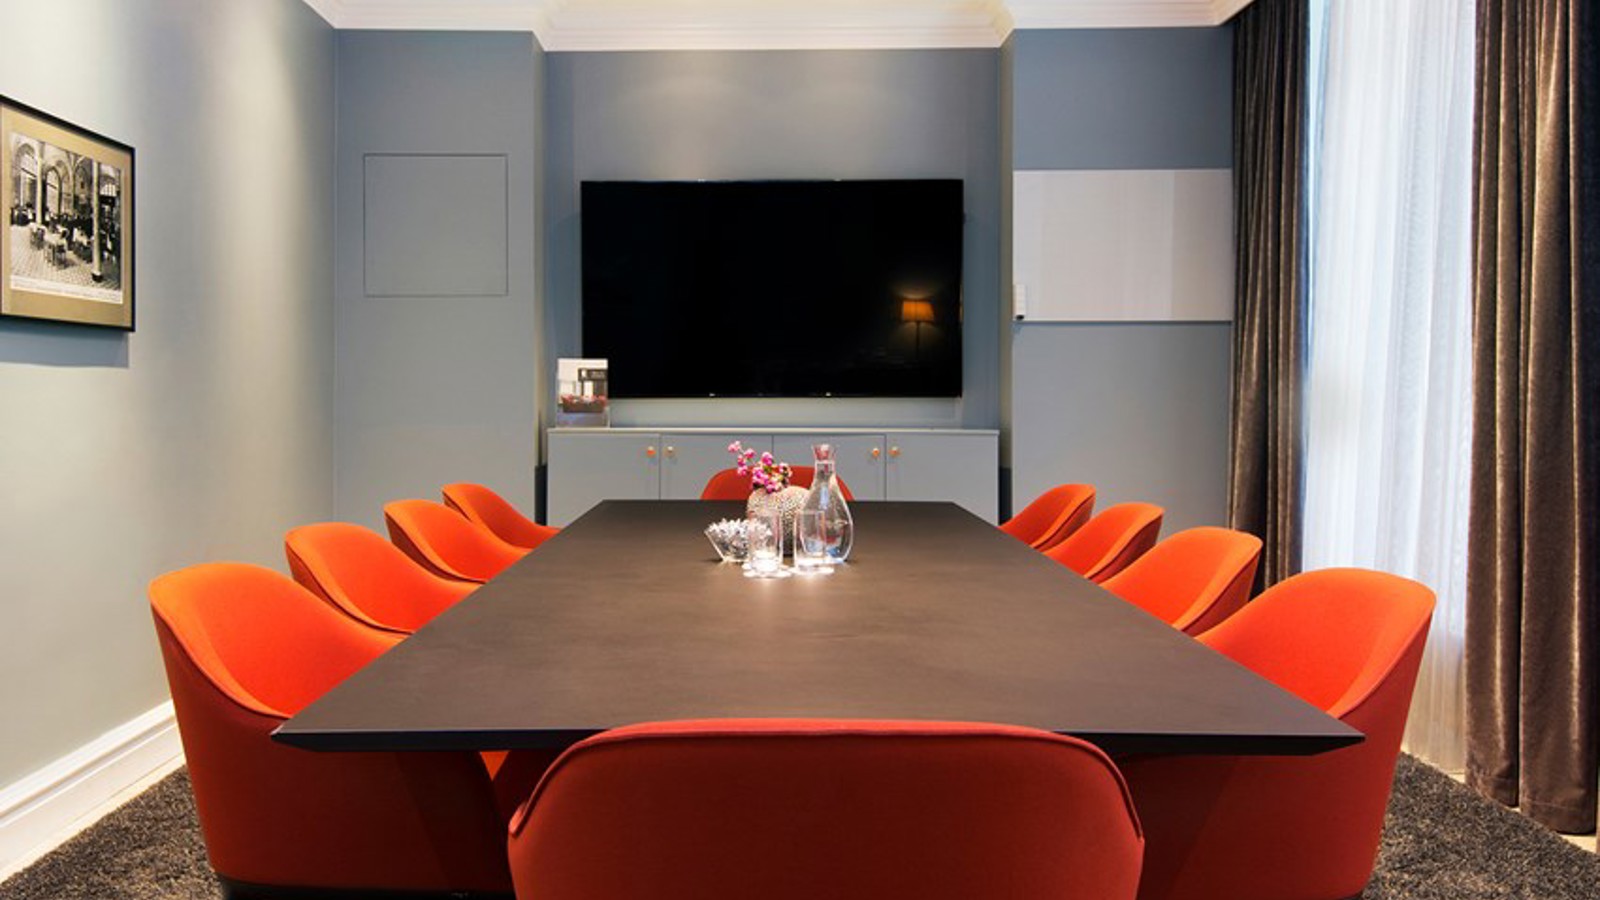 Board room with dark brown table, red chairs and blue walls